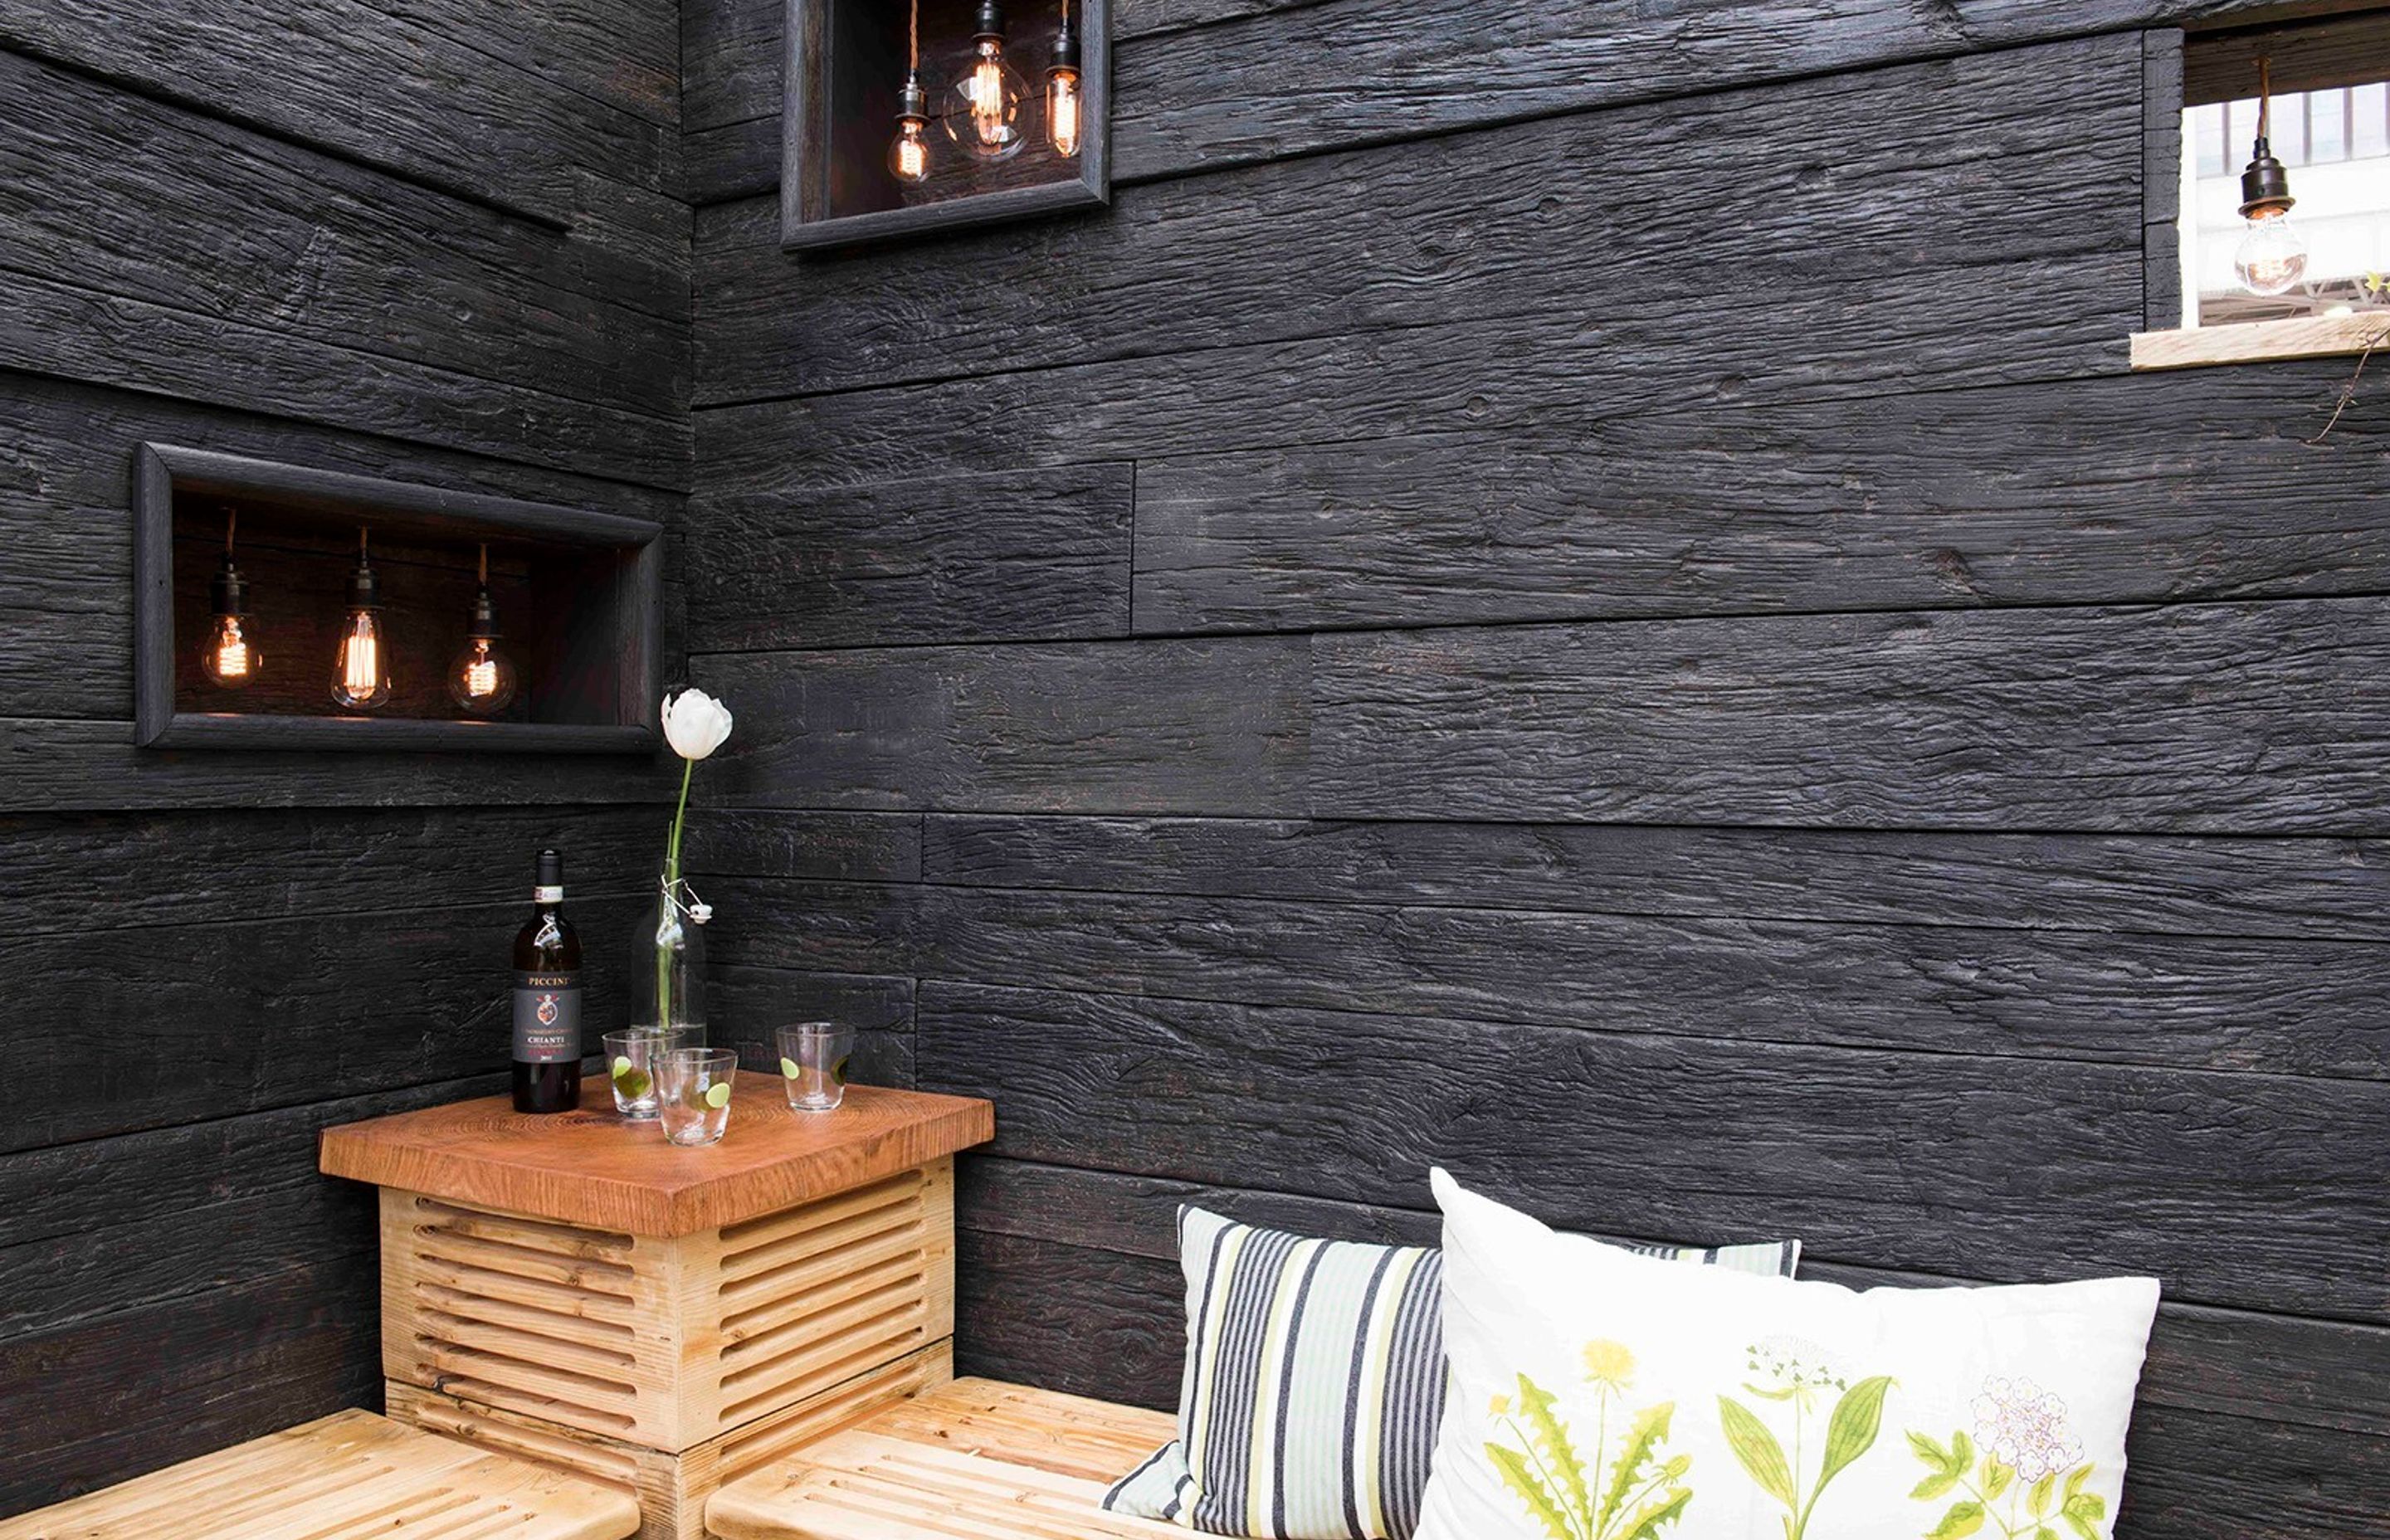 Millboard's Embered Oak decking planks were used for this feature wall